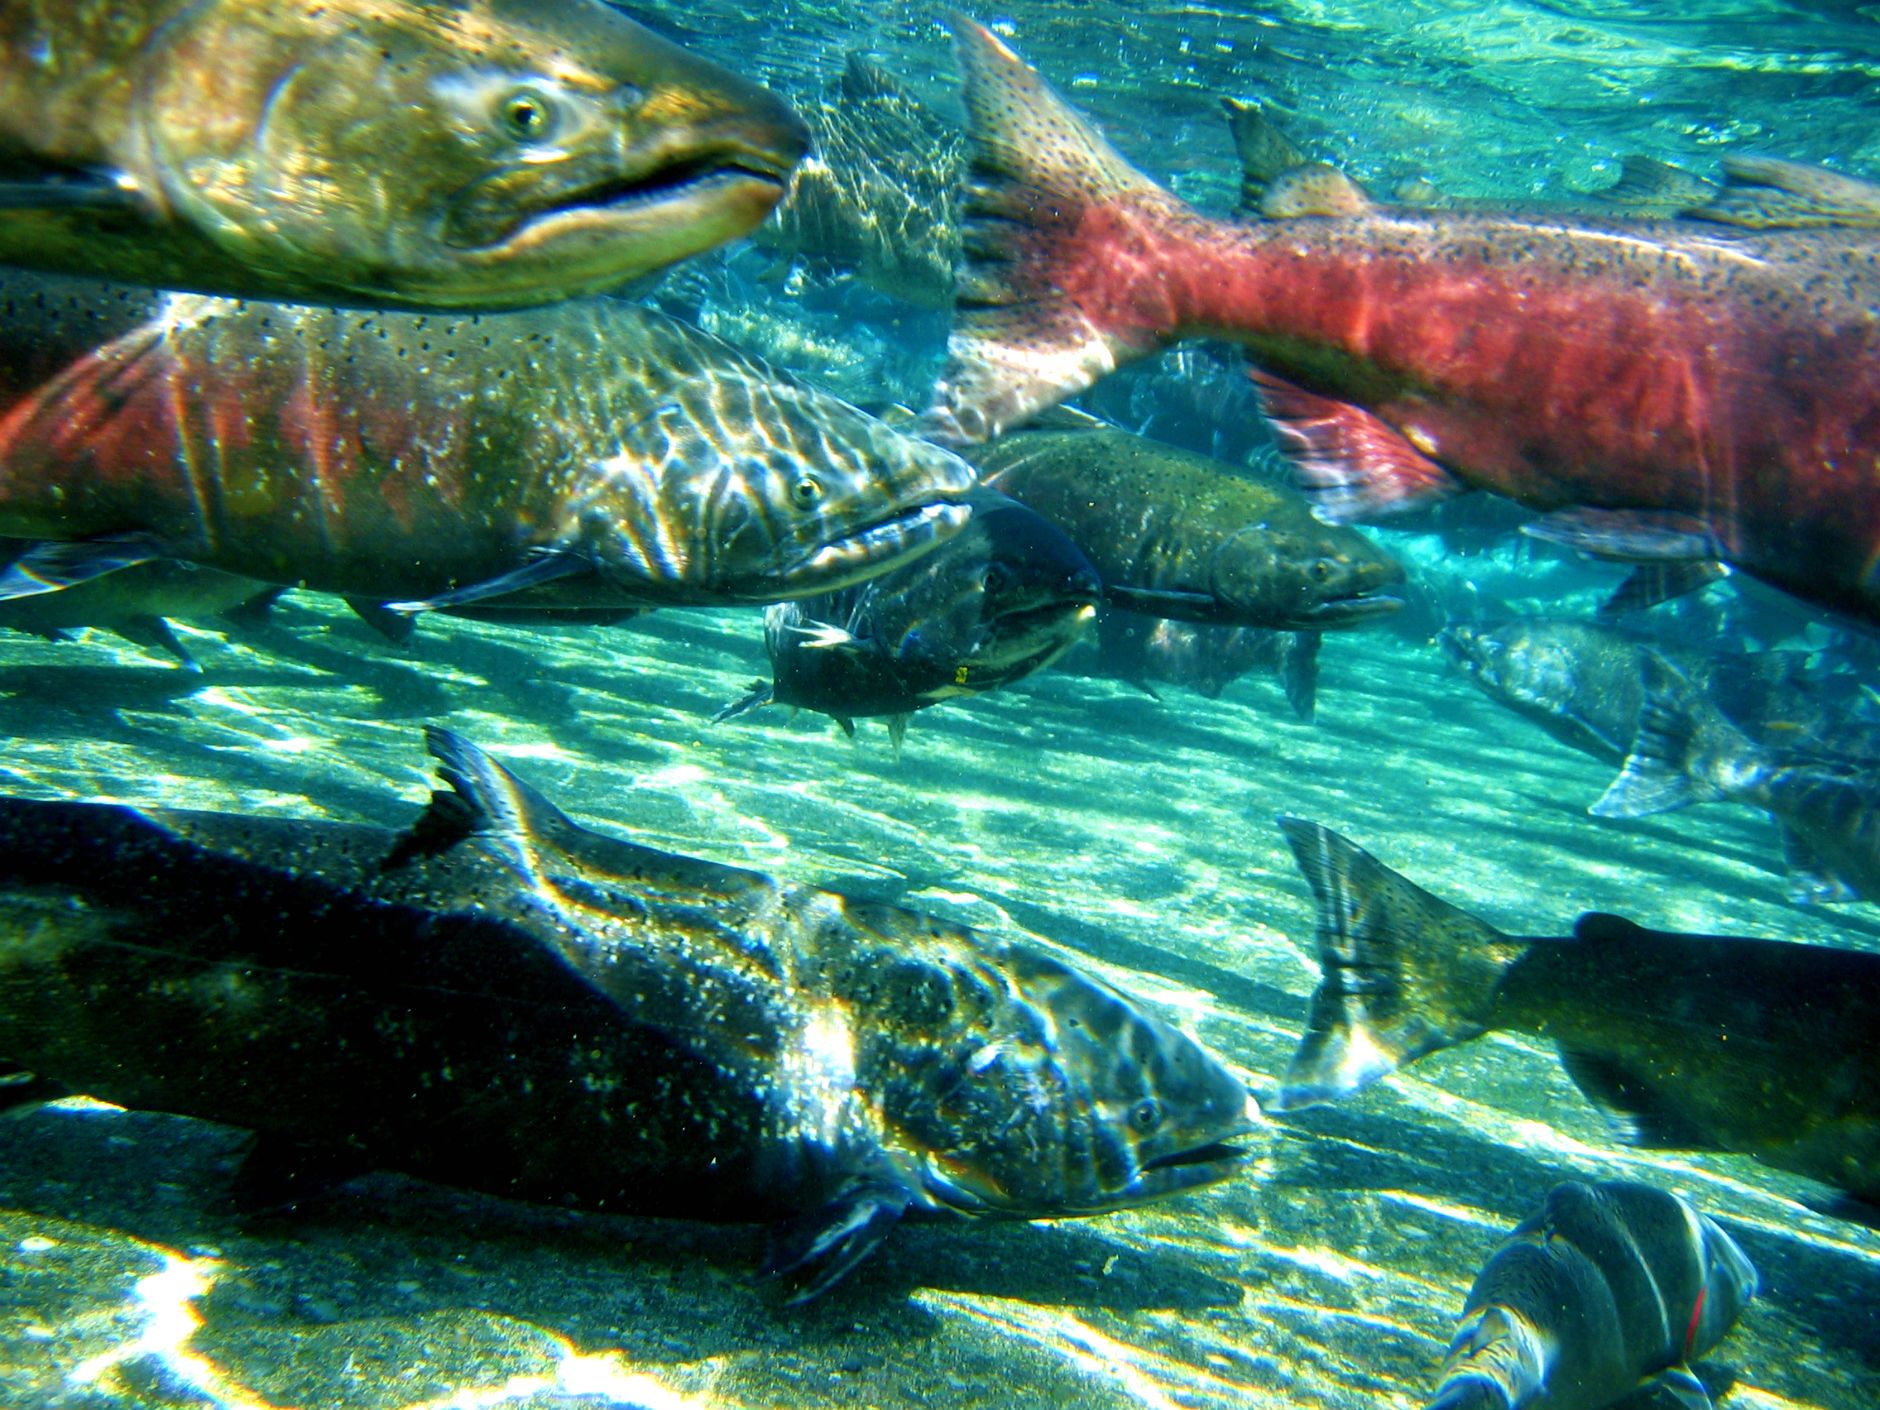 Fish swimming in a river, with one of them being a red salmon. - Salmon